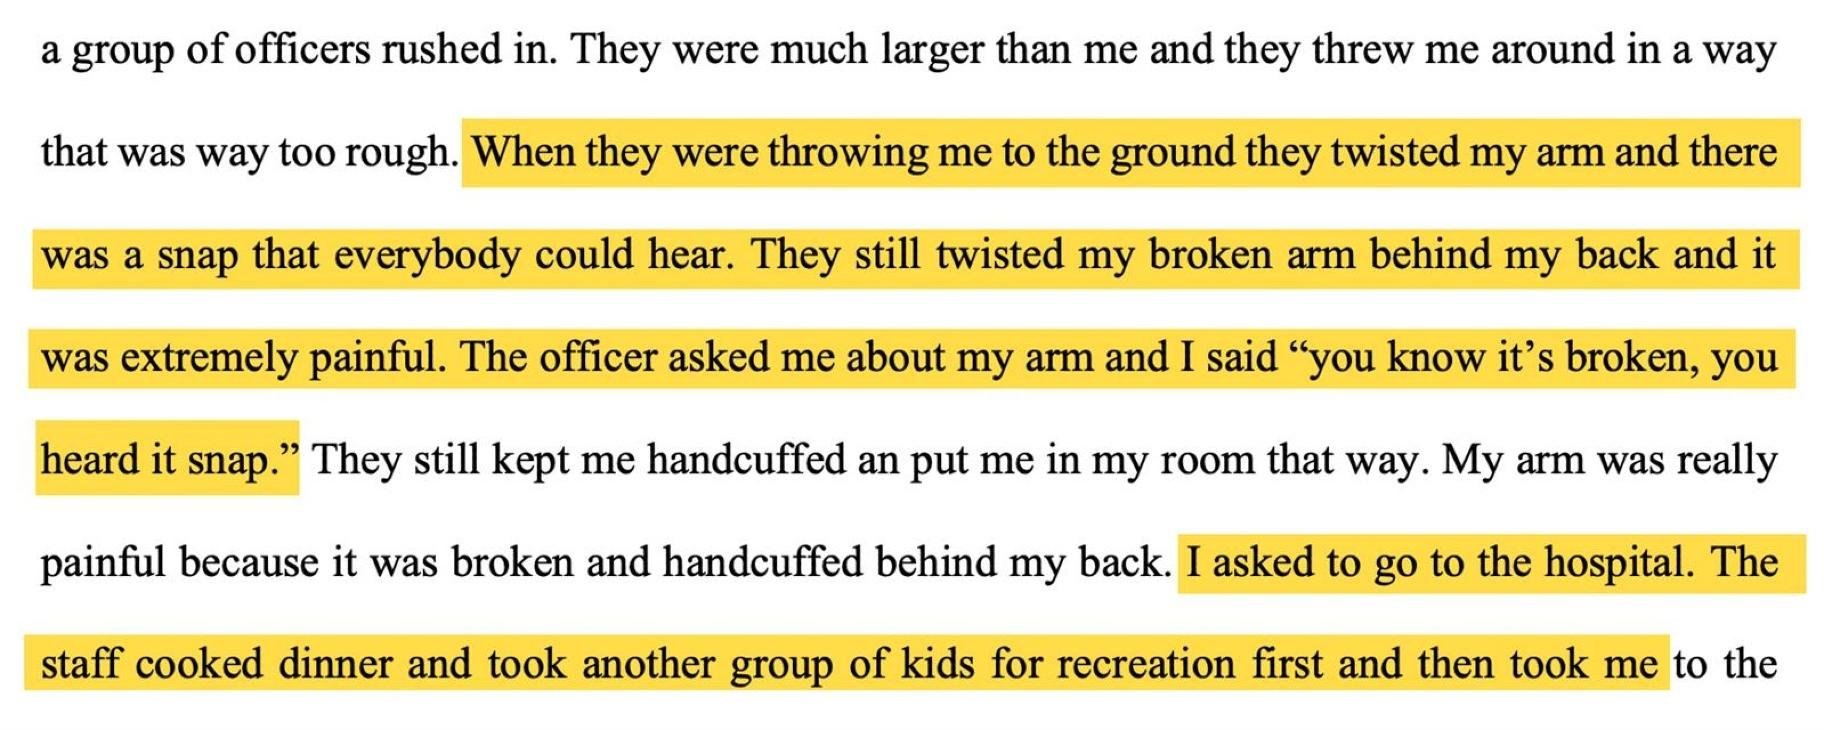 An excerpt from a youth’s sworn statement entered as evidence by the ACLU in a federal suit against the Franklin County detention center in which he relates how his arm was broken by sheriff’s deputies. (Obtained by Capitol News Illinois and ProPublica. Highlighting by ProPublica.)